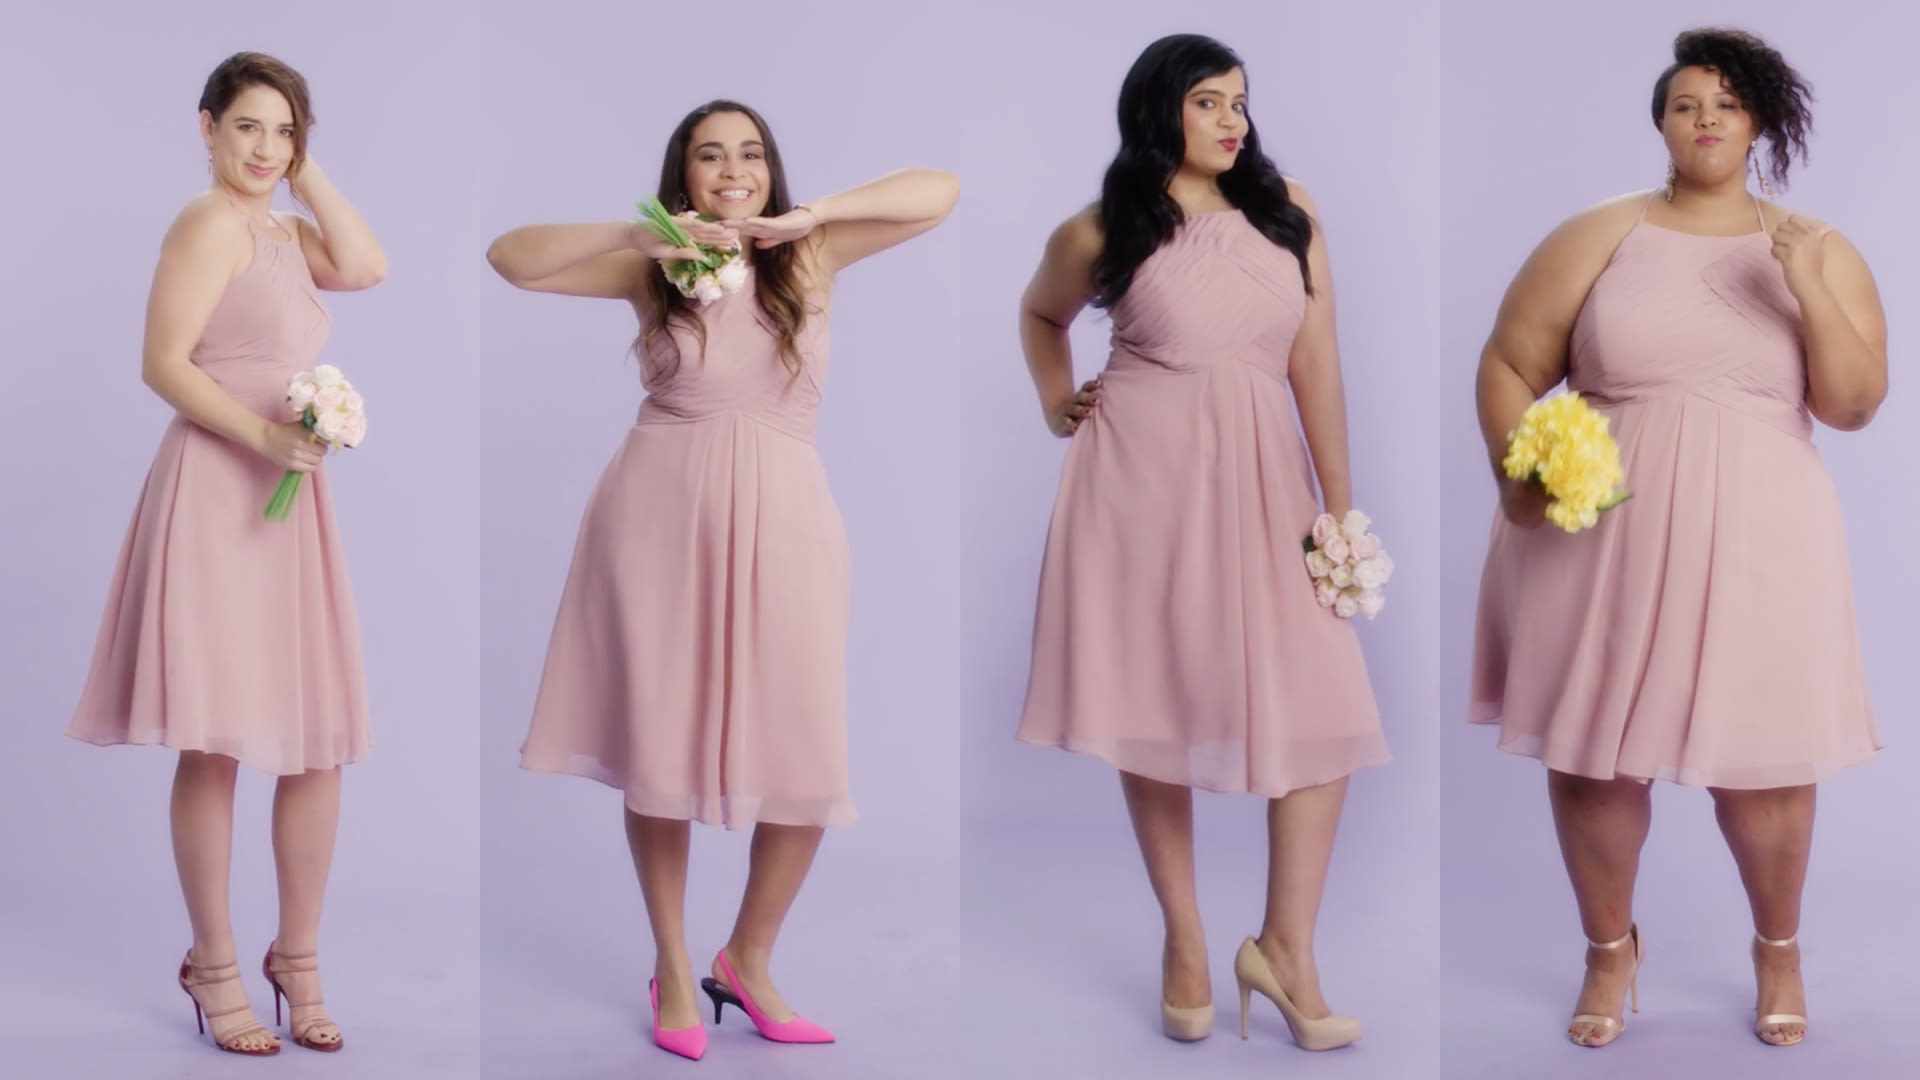 Watch Women Sizes 0 Through 28 Try On The Same Bridesmaid Dress Glamour